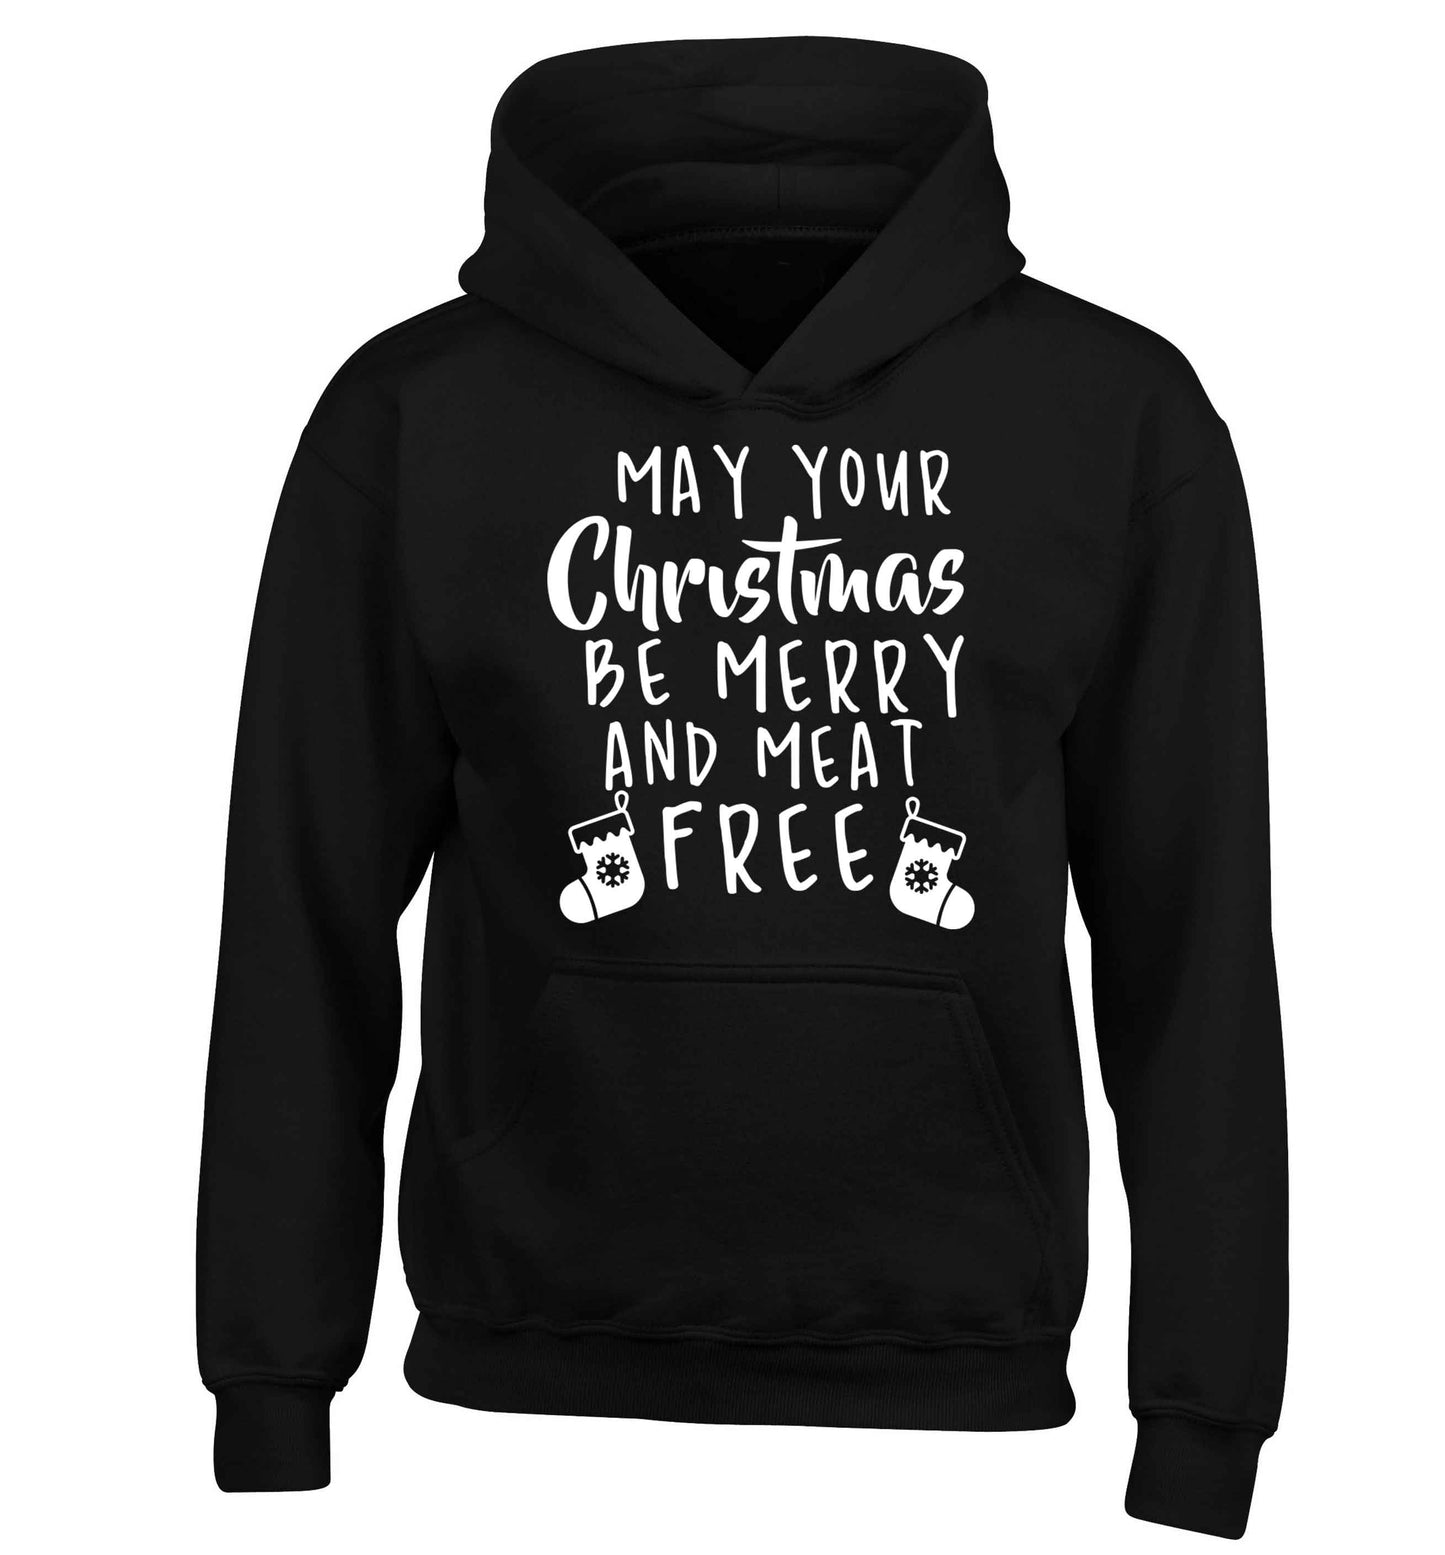 May your Christmas be merry and meat free children's black hoodie 12-13 Years